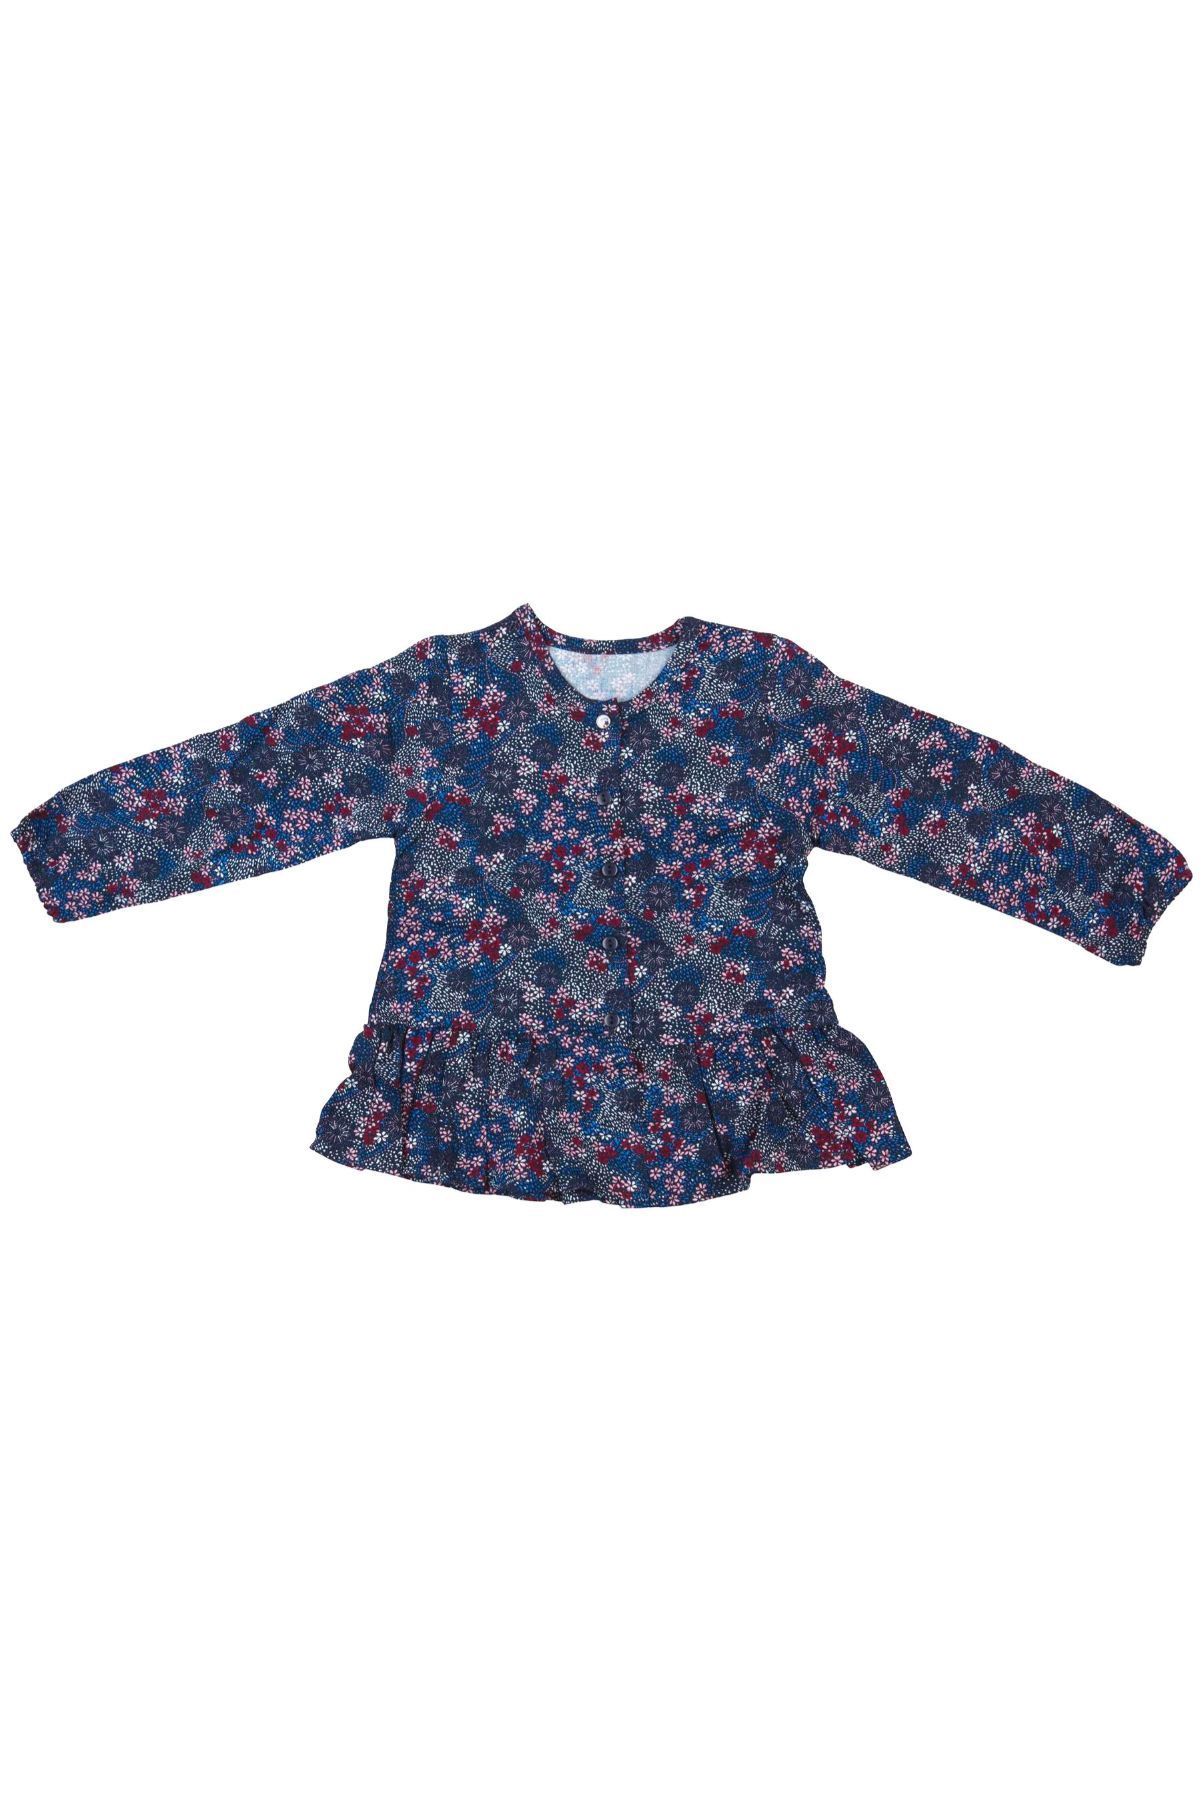 Dosso Dossi-Bebepan 3691 NAVY BLUE Girl Blouse